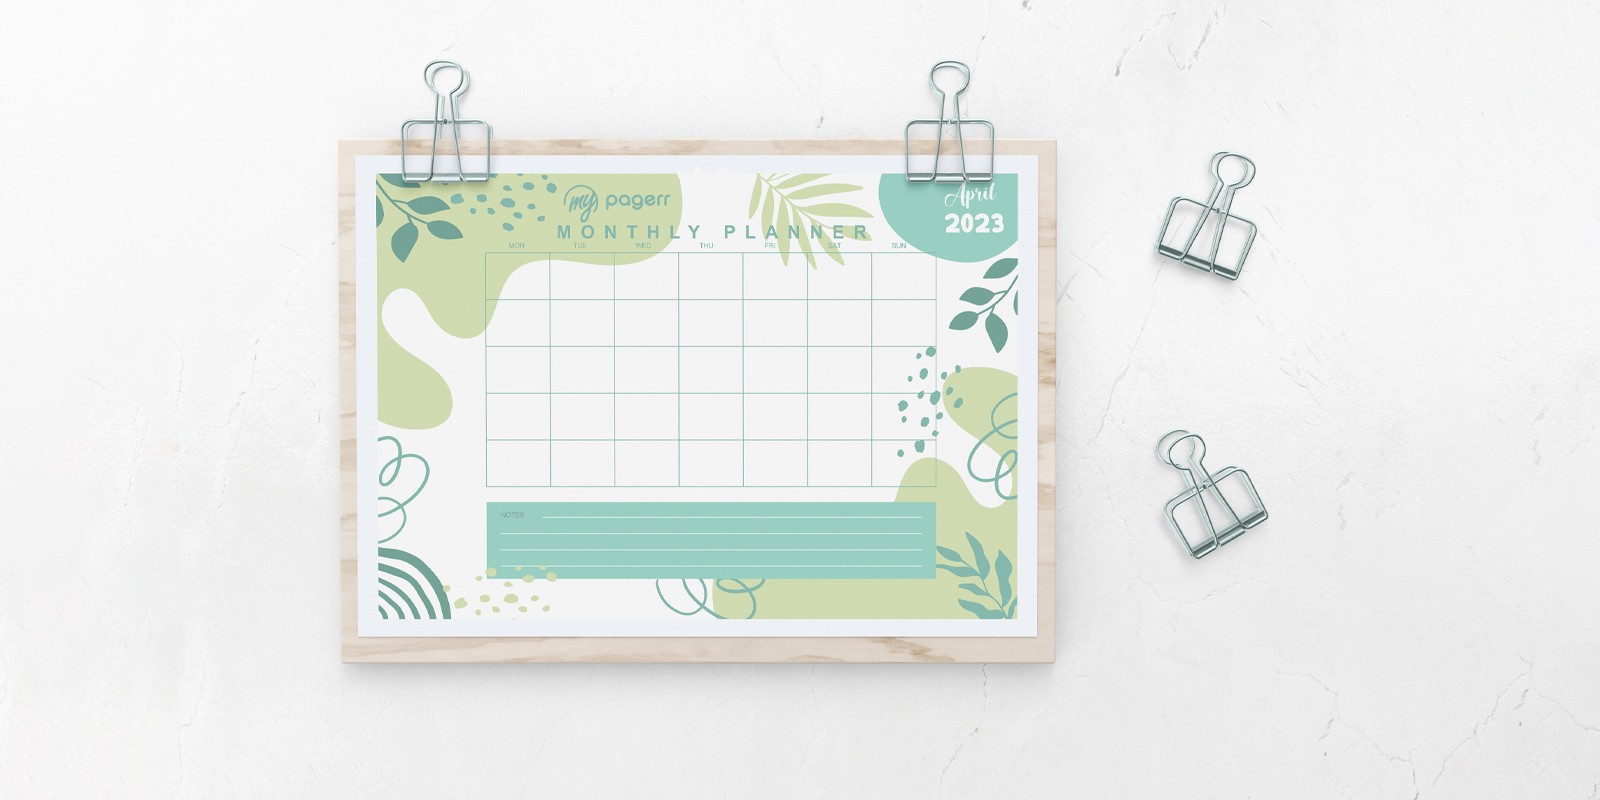 Calendar planners in Seville - Print with Pagerr